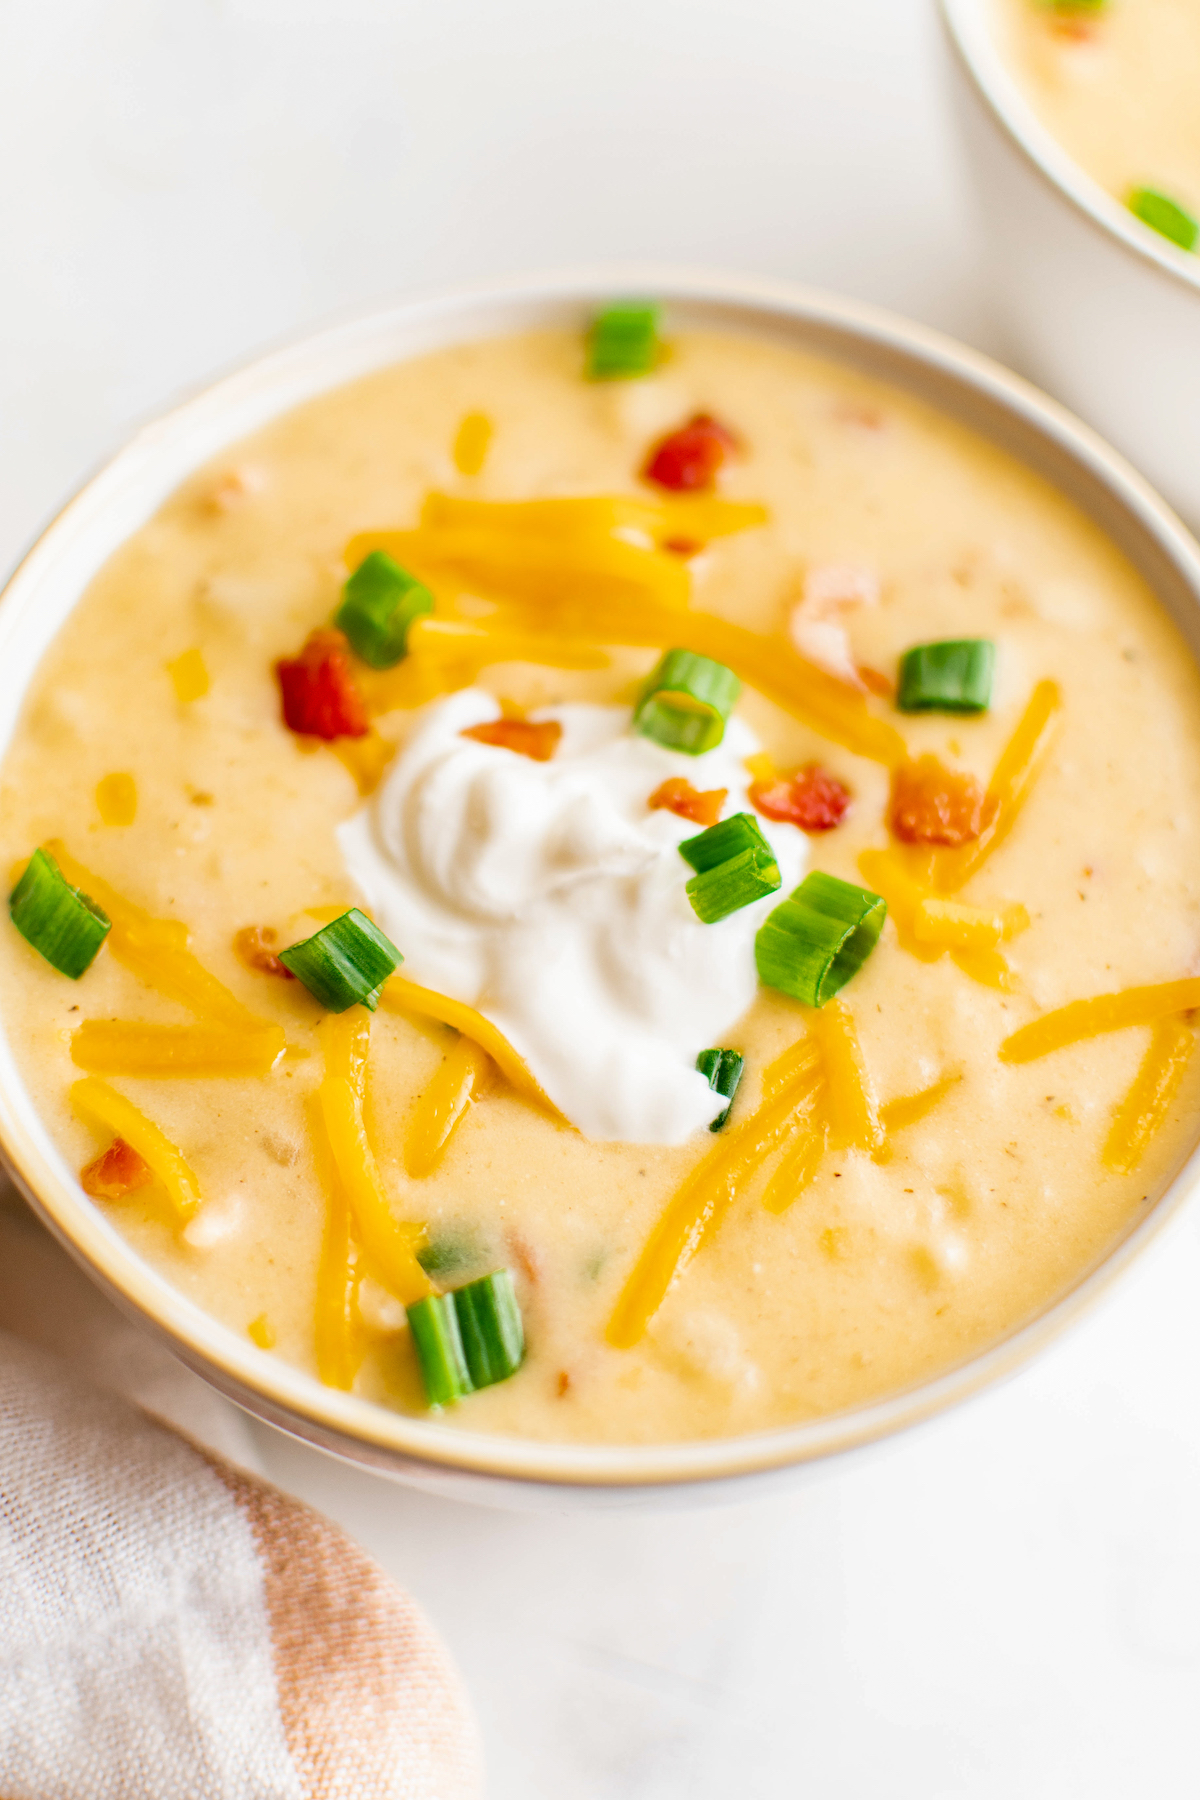 A bowl of potato soup garnished with sour cream, cheddar cheese, green onion, and bacon bits.